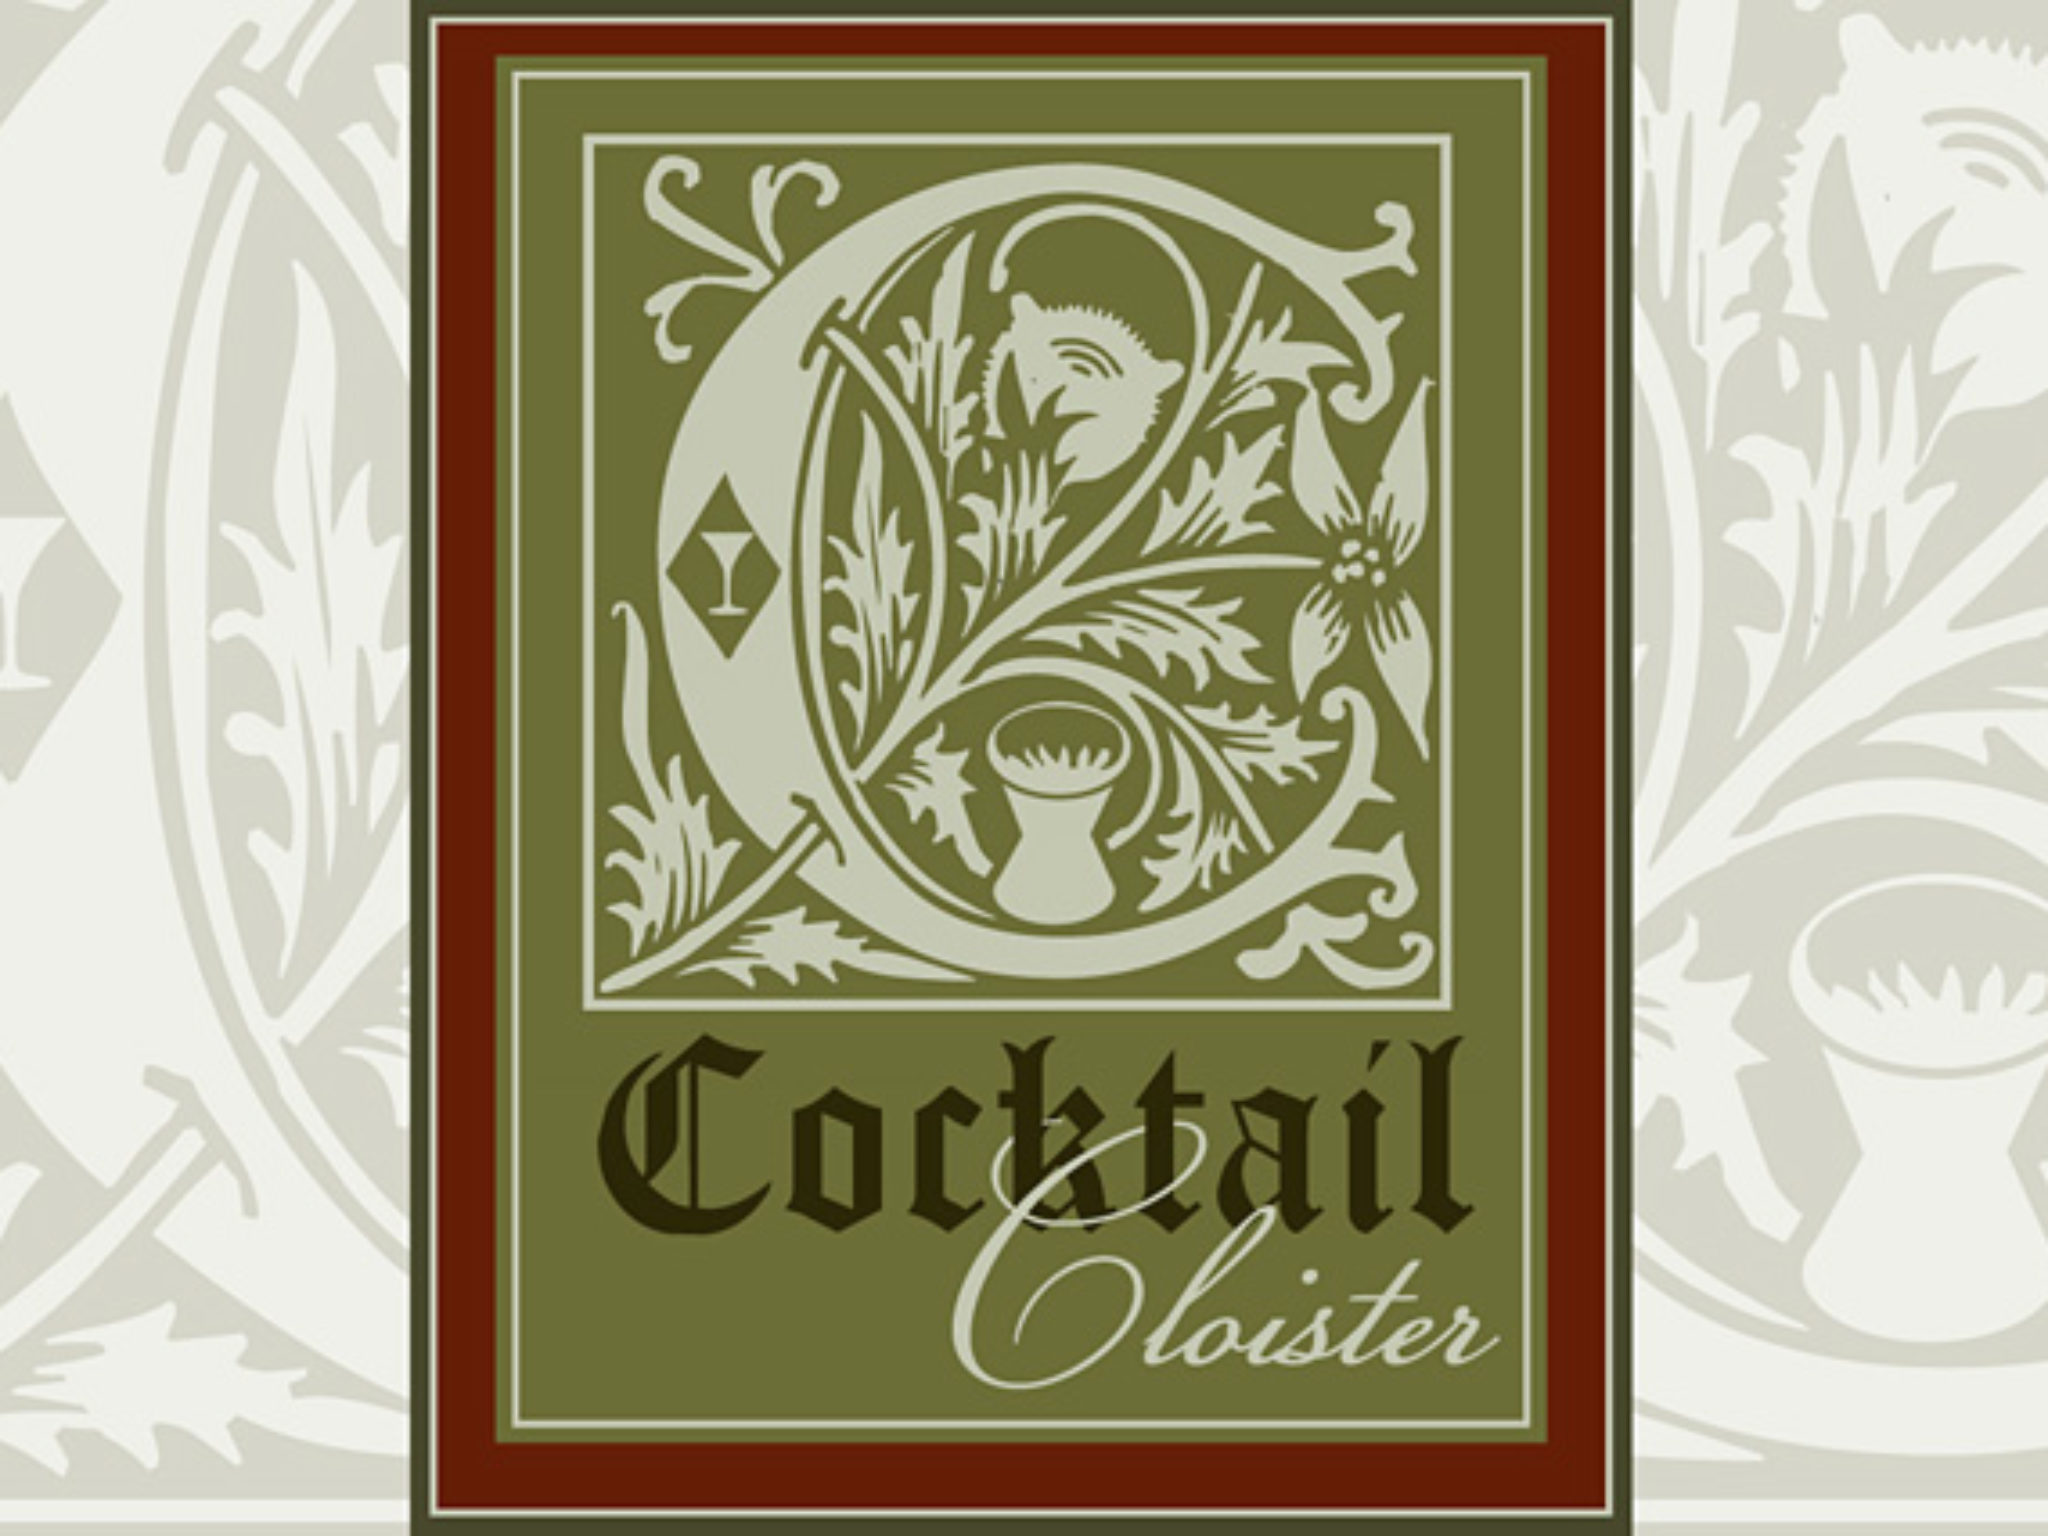 Cocktaillogo066__0029_GIBBONS coctail cloister 2